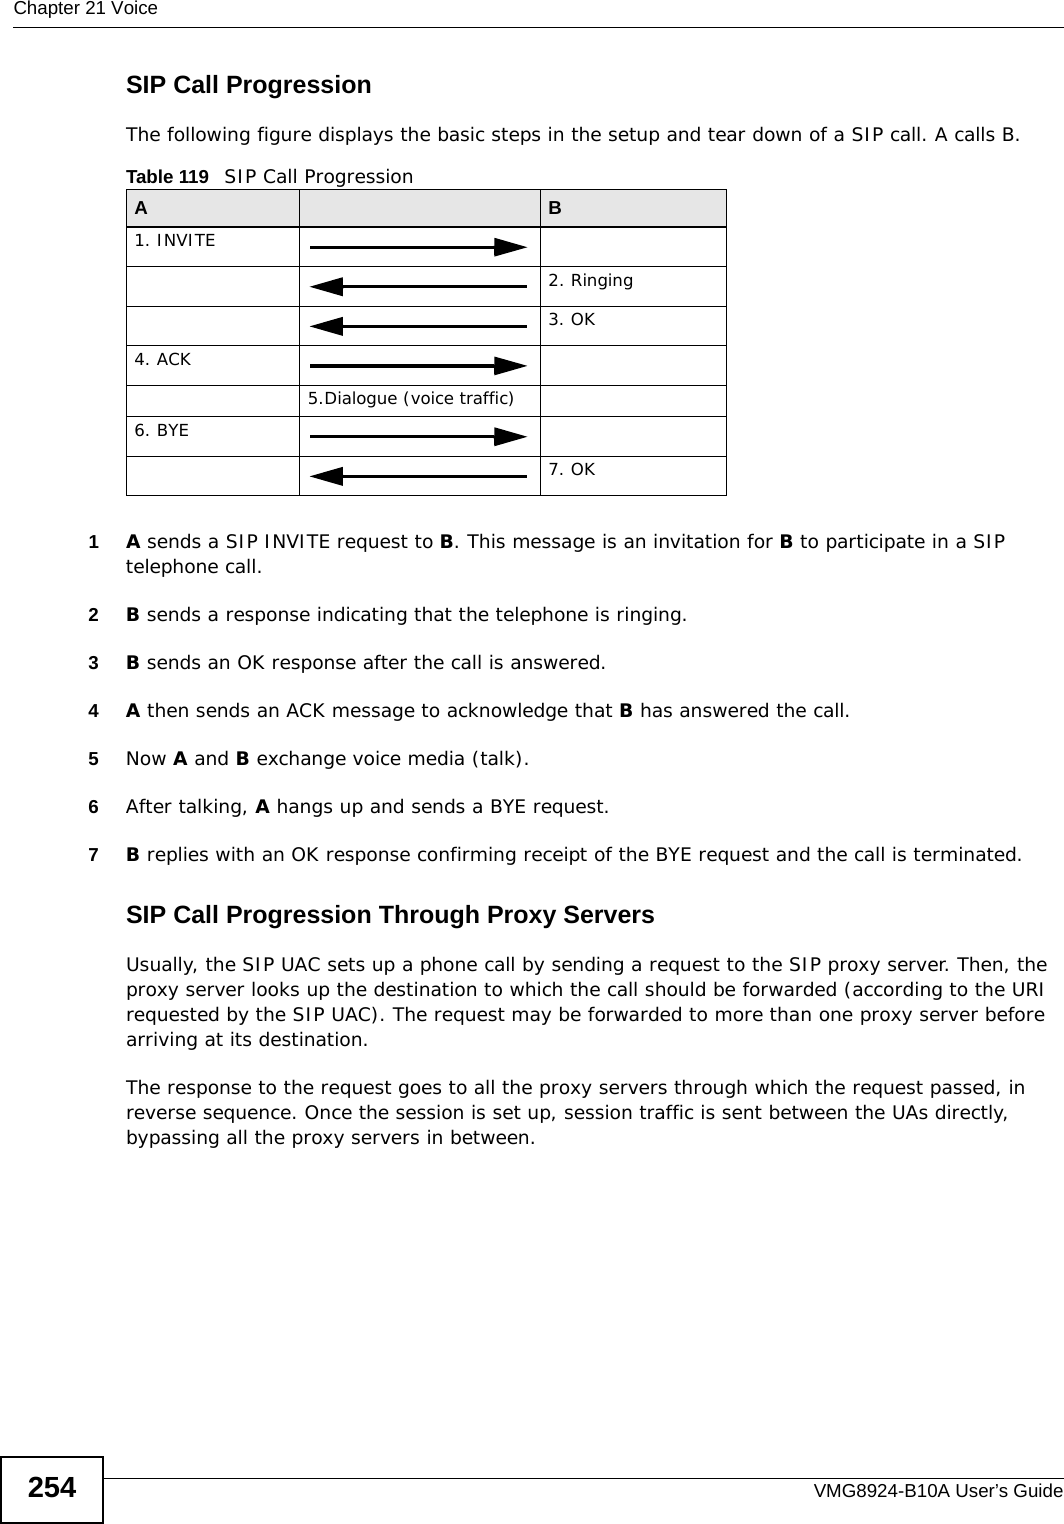 Chapter 21 VoiceVMG8924-B10A User’s Guide254SIP Call ProgressionThe following figure displays the basic steps in the setup and tear down of a SIP call. A calls B. 1A sends a SIP INVITE request to B. This message is an invitation for B to participate in a SIP telephone call. 2B sends a response indicating that the telephone is ringing.3B sends an OK response after the call is answered. 4A then sends an ACK message to acknowledge that B has answered the call. 5Now A and B exchange voice media (talk). 6After talking, A hangs up and sends a BYE request. 7B replies with an OK response confirming receipt of the BYE request and the call is terminated.SIP Call Progression Through Proxy ServersUsually, the SIP UAC sets up a phone call by sending a request to the SIP proxy server. Then, the proxy server looks up the destination to which the call should be forwarded (according to the URI requested by the SIP UAC). The request may be forwarded to more than one proxy server before arriving at its destination. The response to the request goes to all the proxy servers through which the request passed, in reverse sequence. Once the session is set up, session traffic is sent between the UAs directly, bypassing all the proxy servers in between.Table 119   SIP Call ProgressionA B1. INVITE2. Ringing3. OK4. ACK 5.Dialogue (voice traffic)6. BYE7. OK